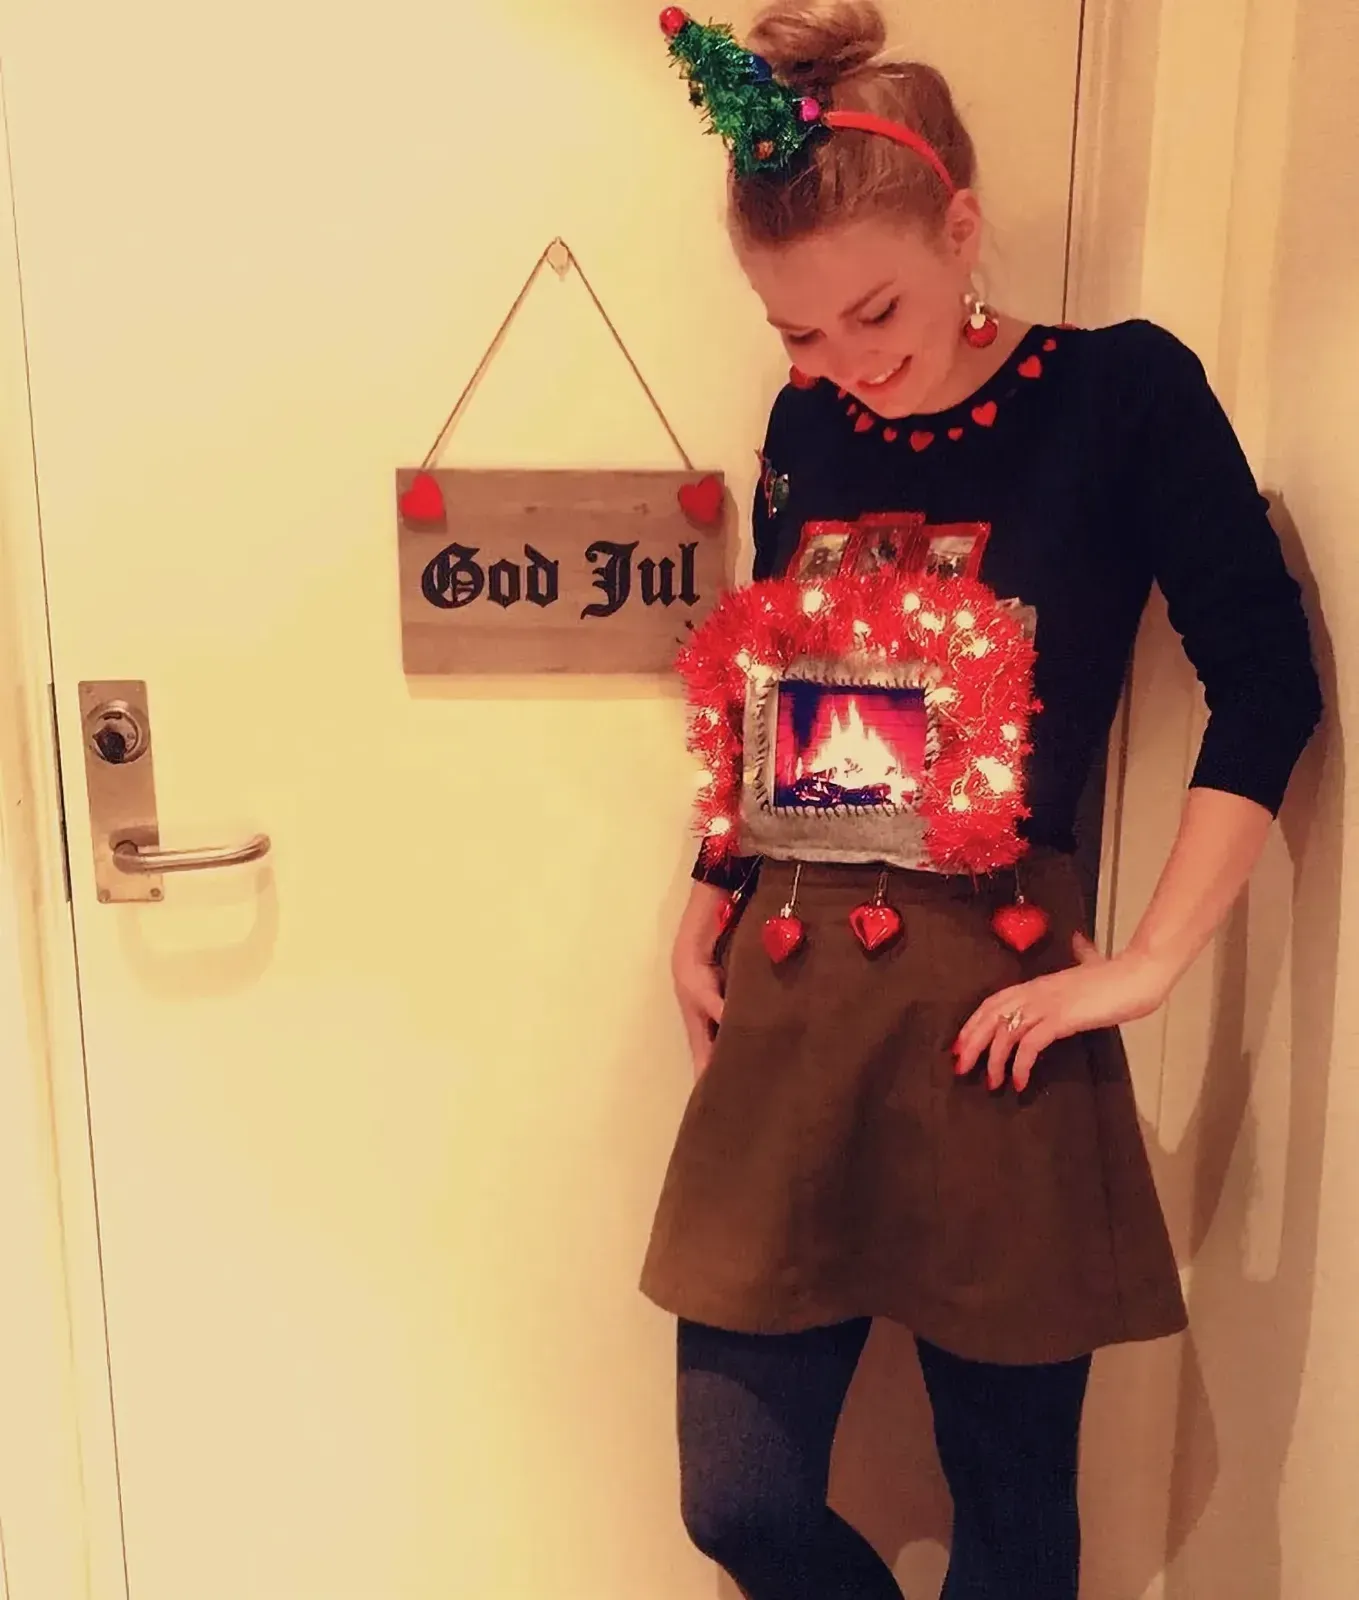 Woman wearing a distinctive Christmas sweater with a fireplace design and a Christmas tree headband